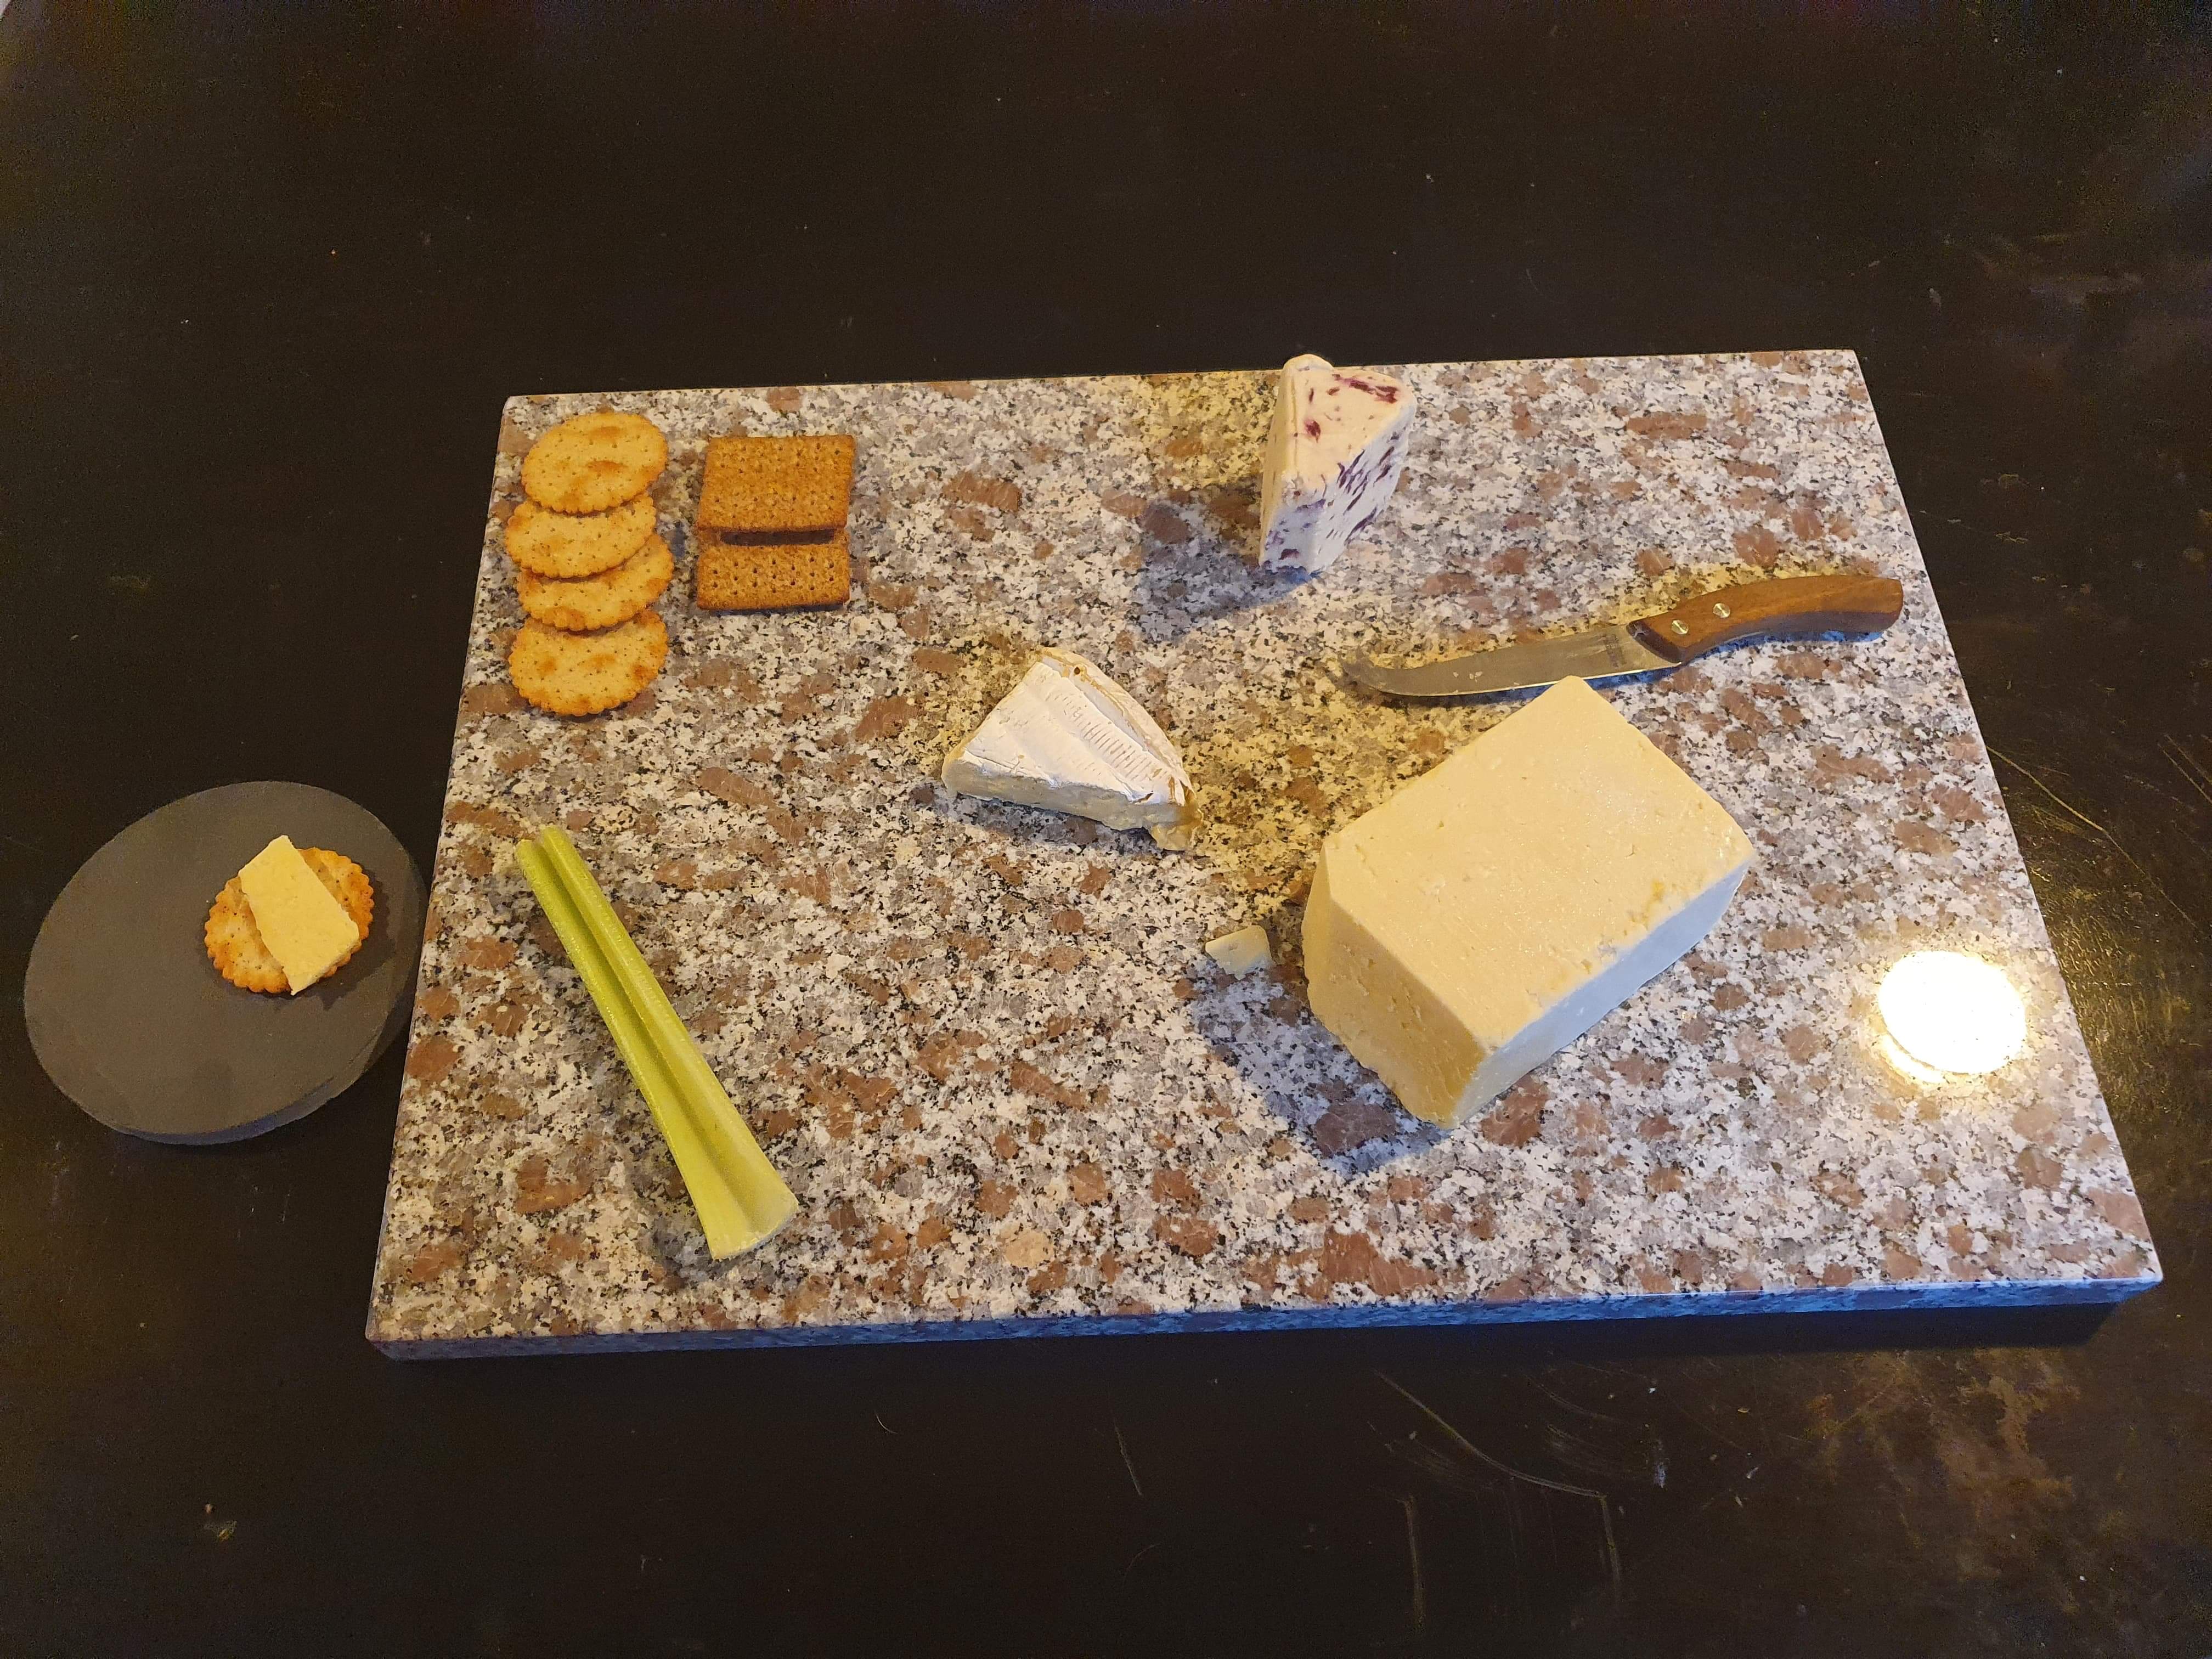 A fine way to finish the vening off with this granite chesse board and slate plate